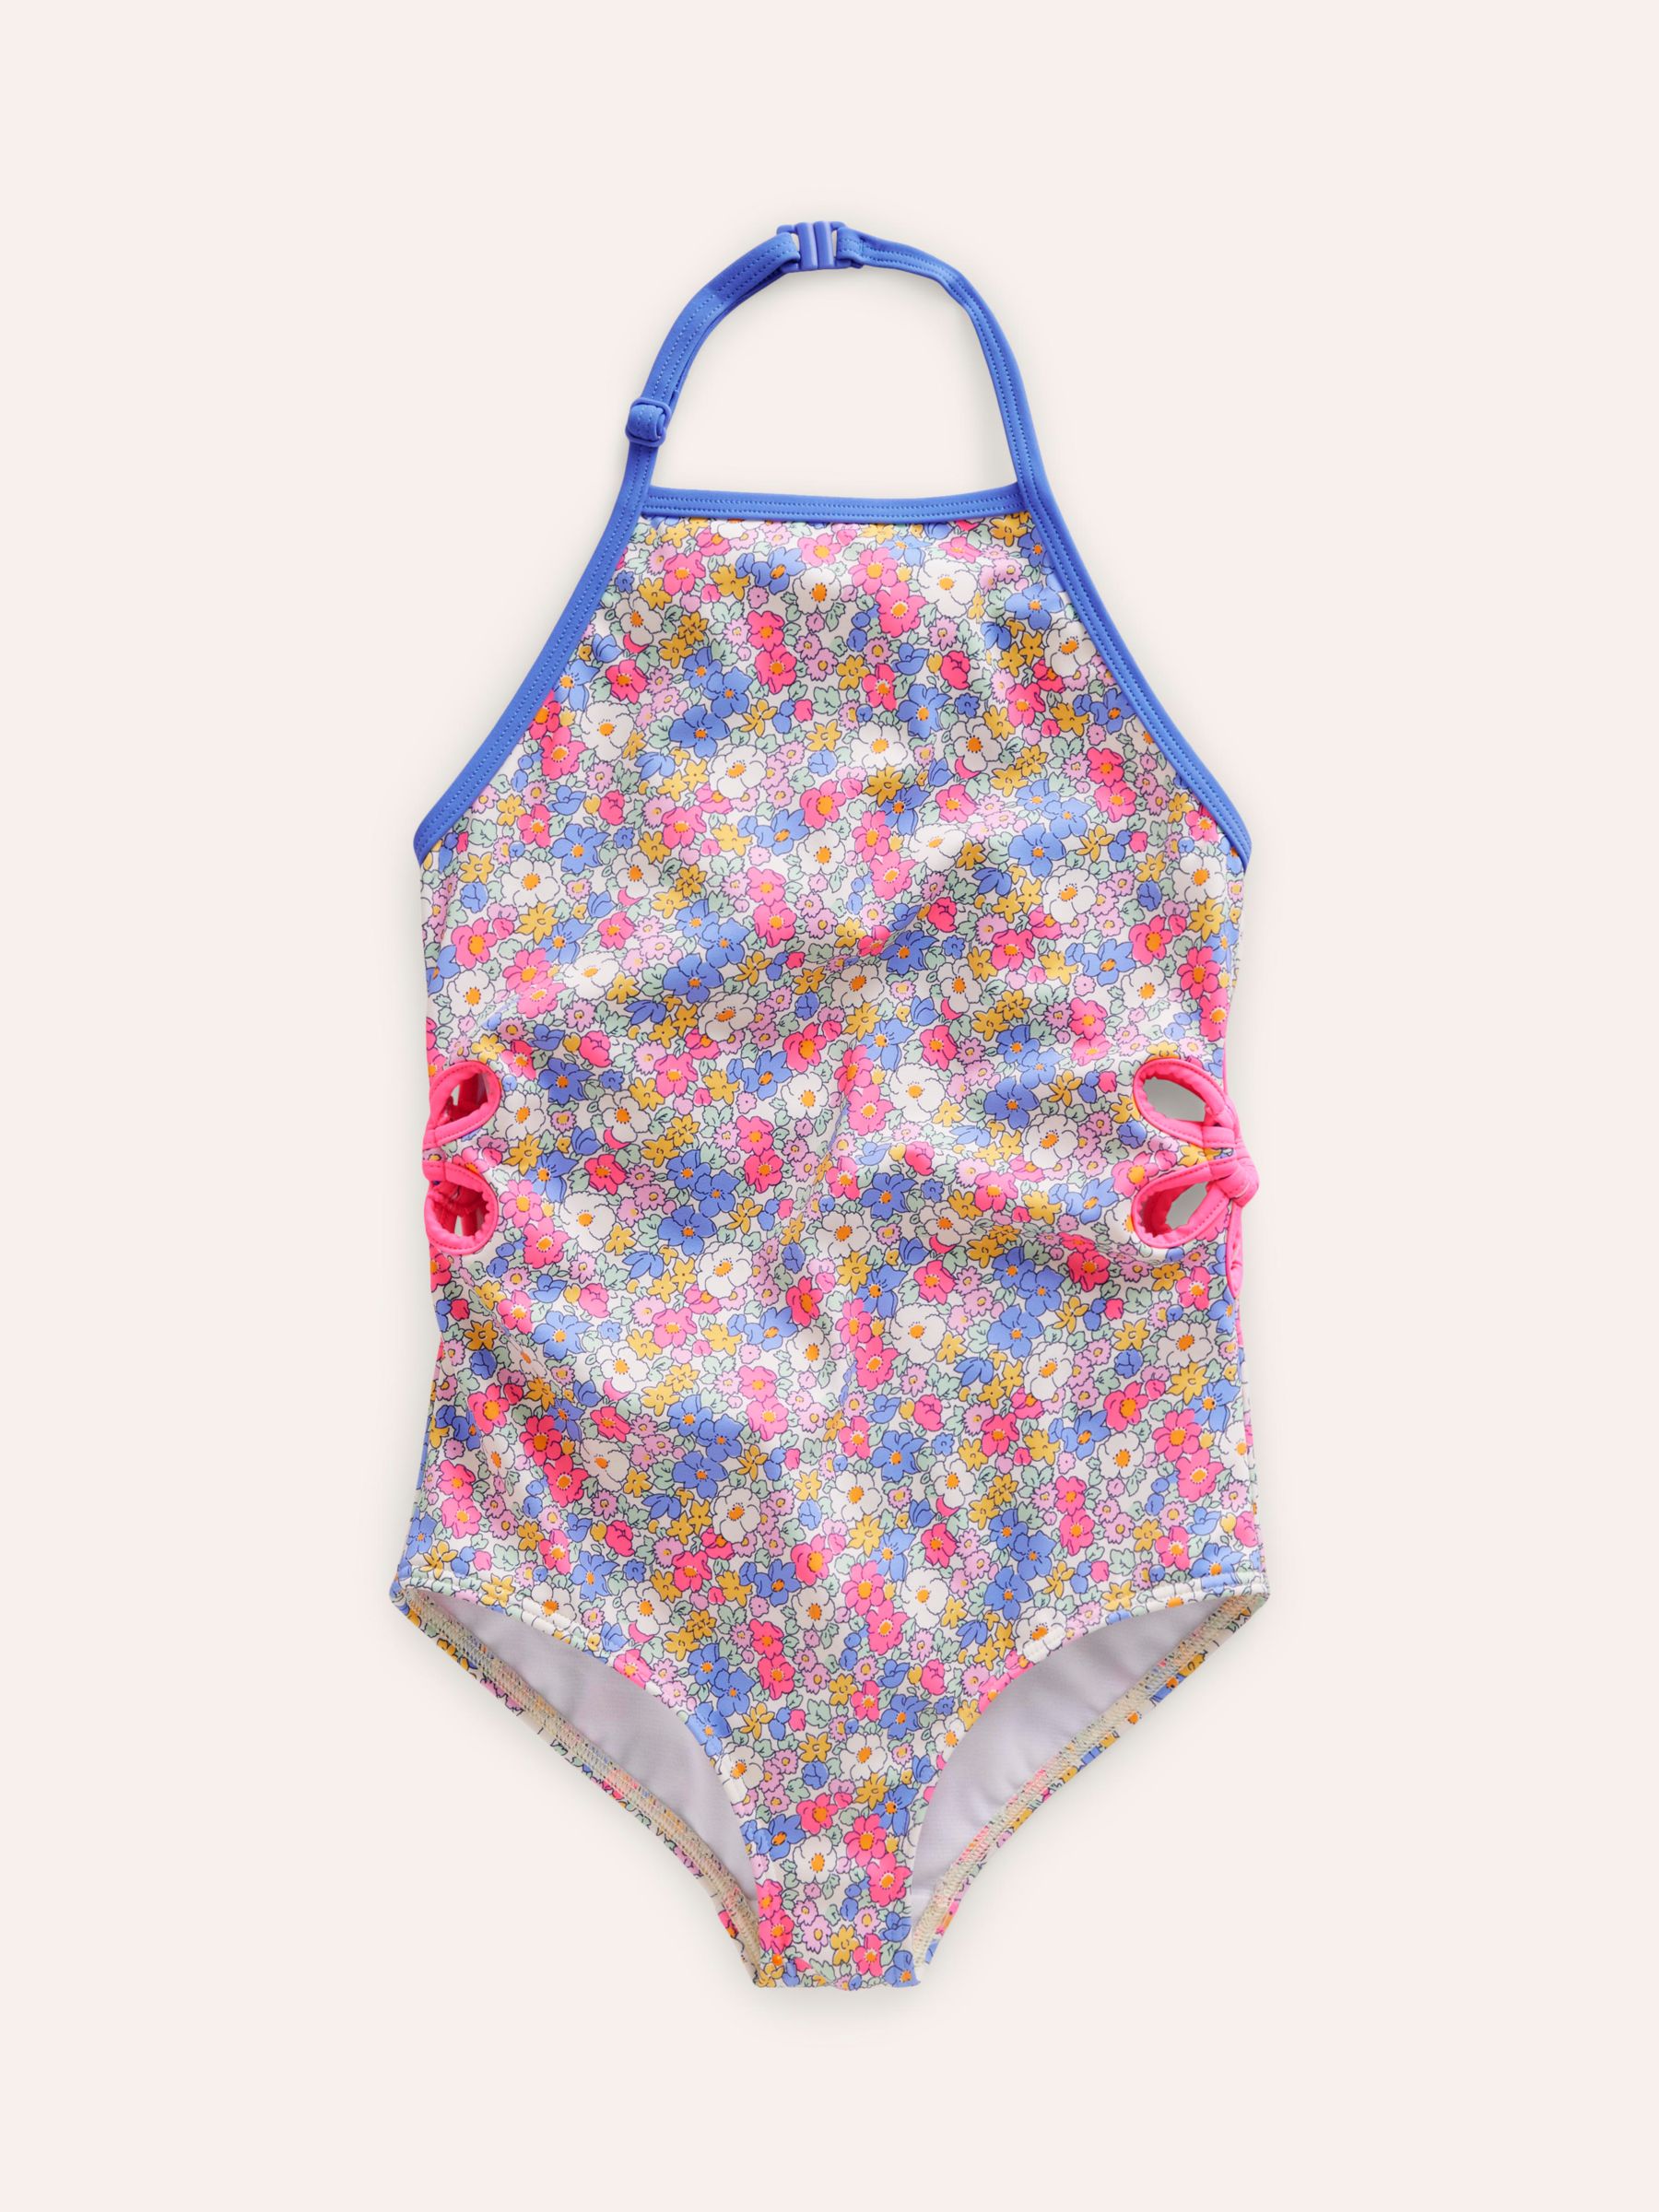 Mini Boden Kids' Cut Out Flower Halter Swimsuit, Pink Nautical Floral, 2-3 years